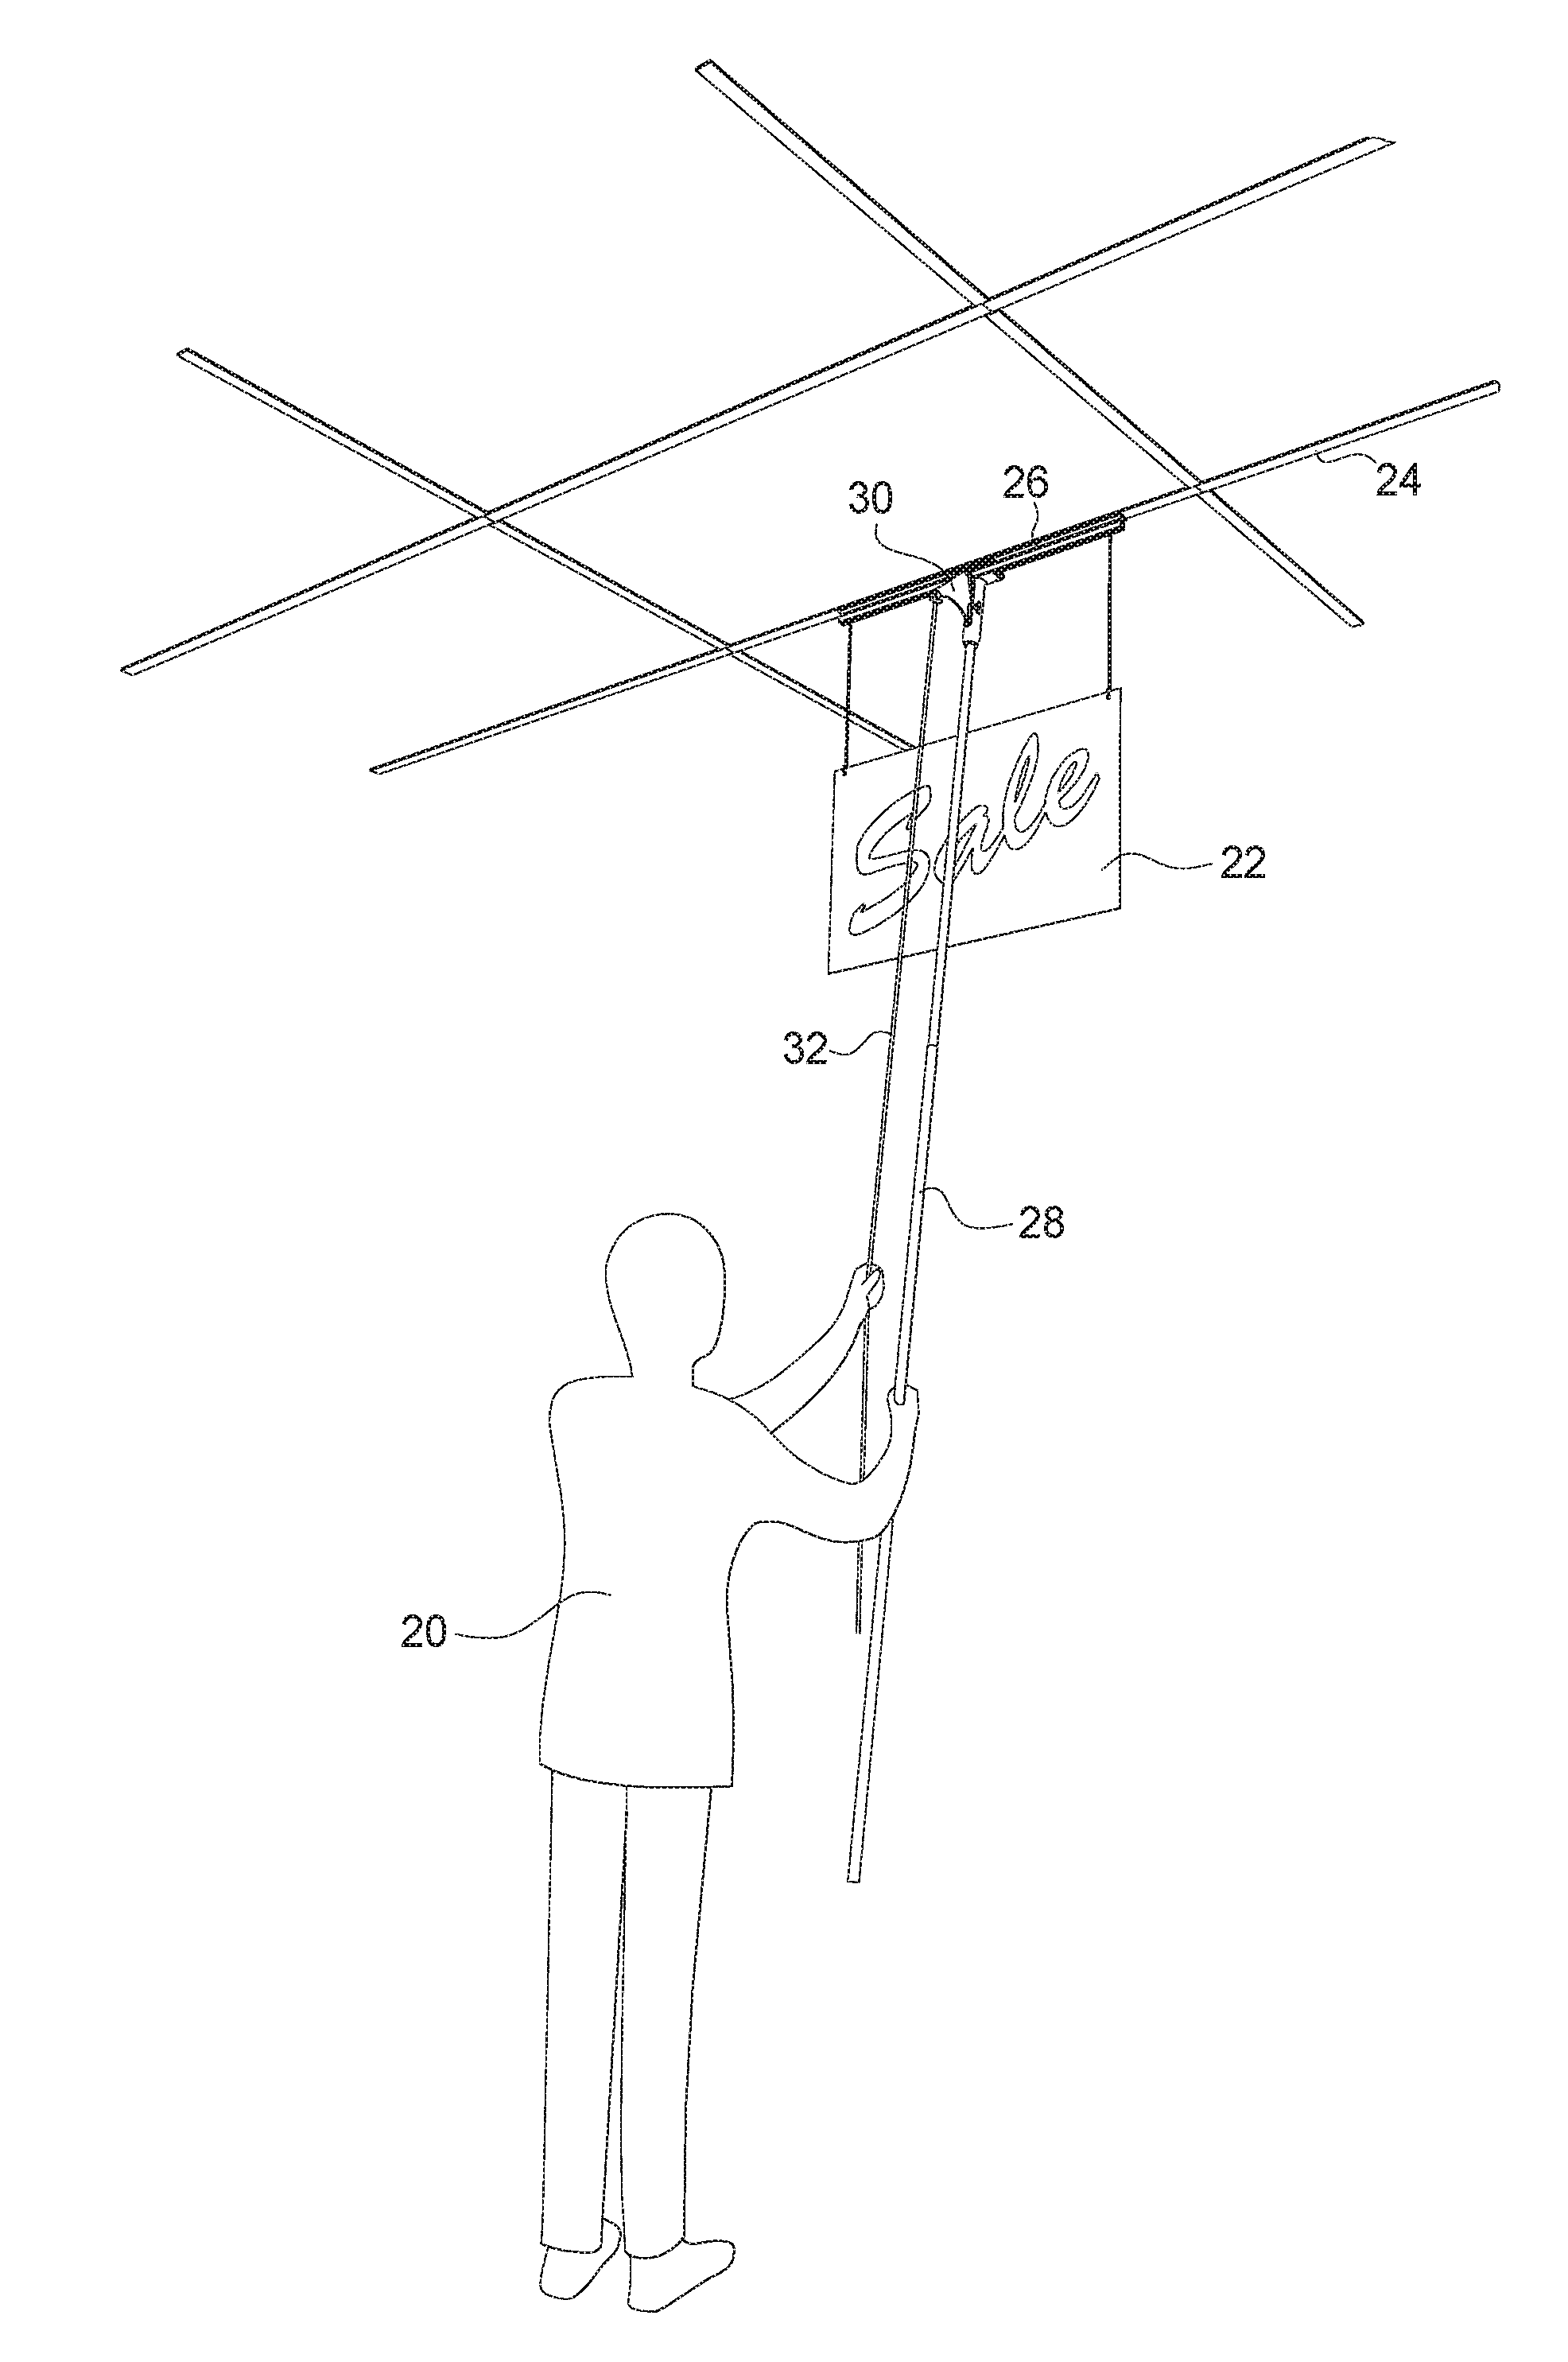 Display mounting system and method